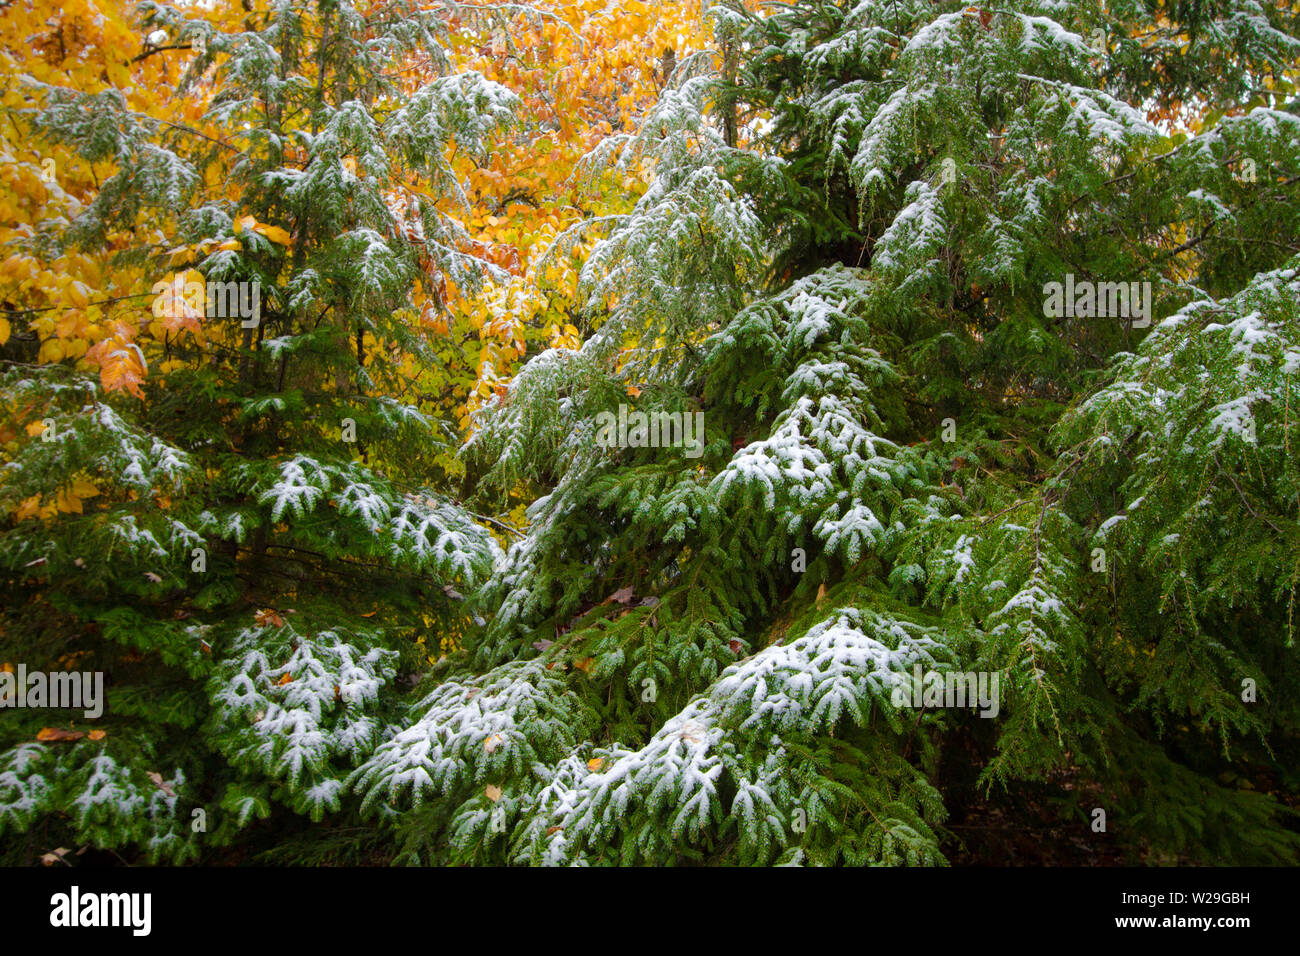 First Snow Of The Season. Fresh snow on Michigan pine trees with vibrant fall foliage in the background as two seasons collide. Stock Photo